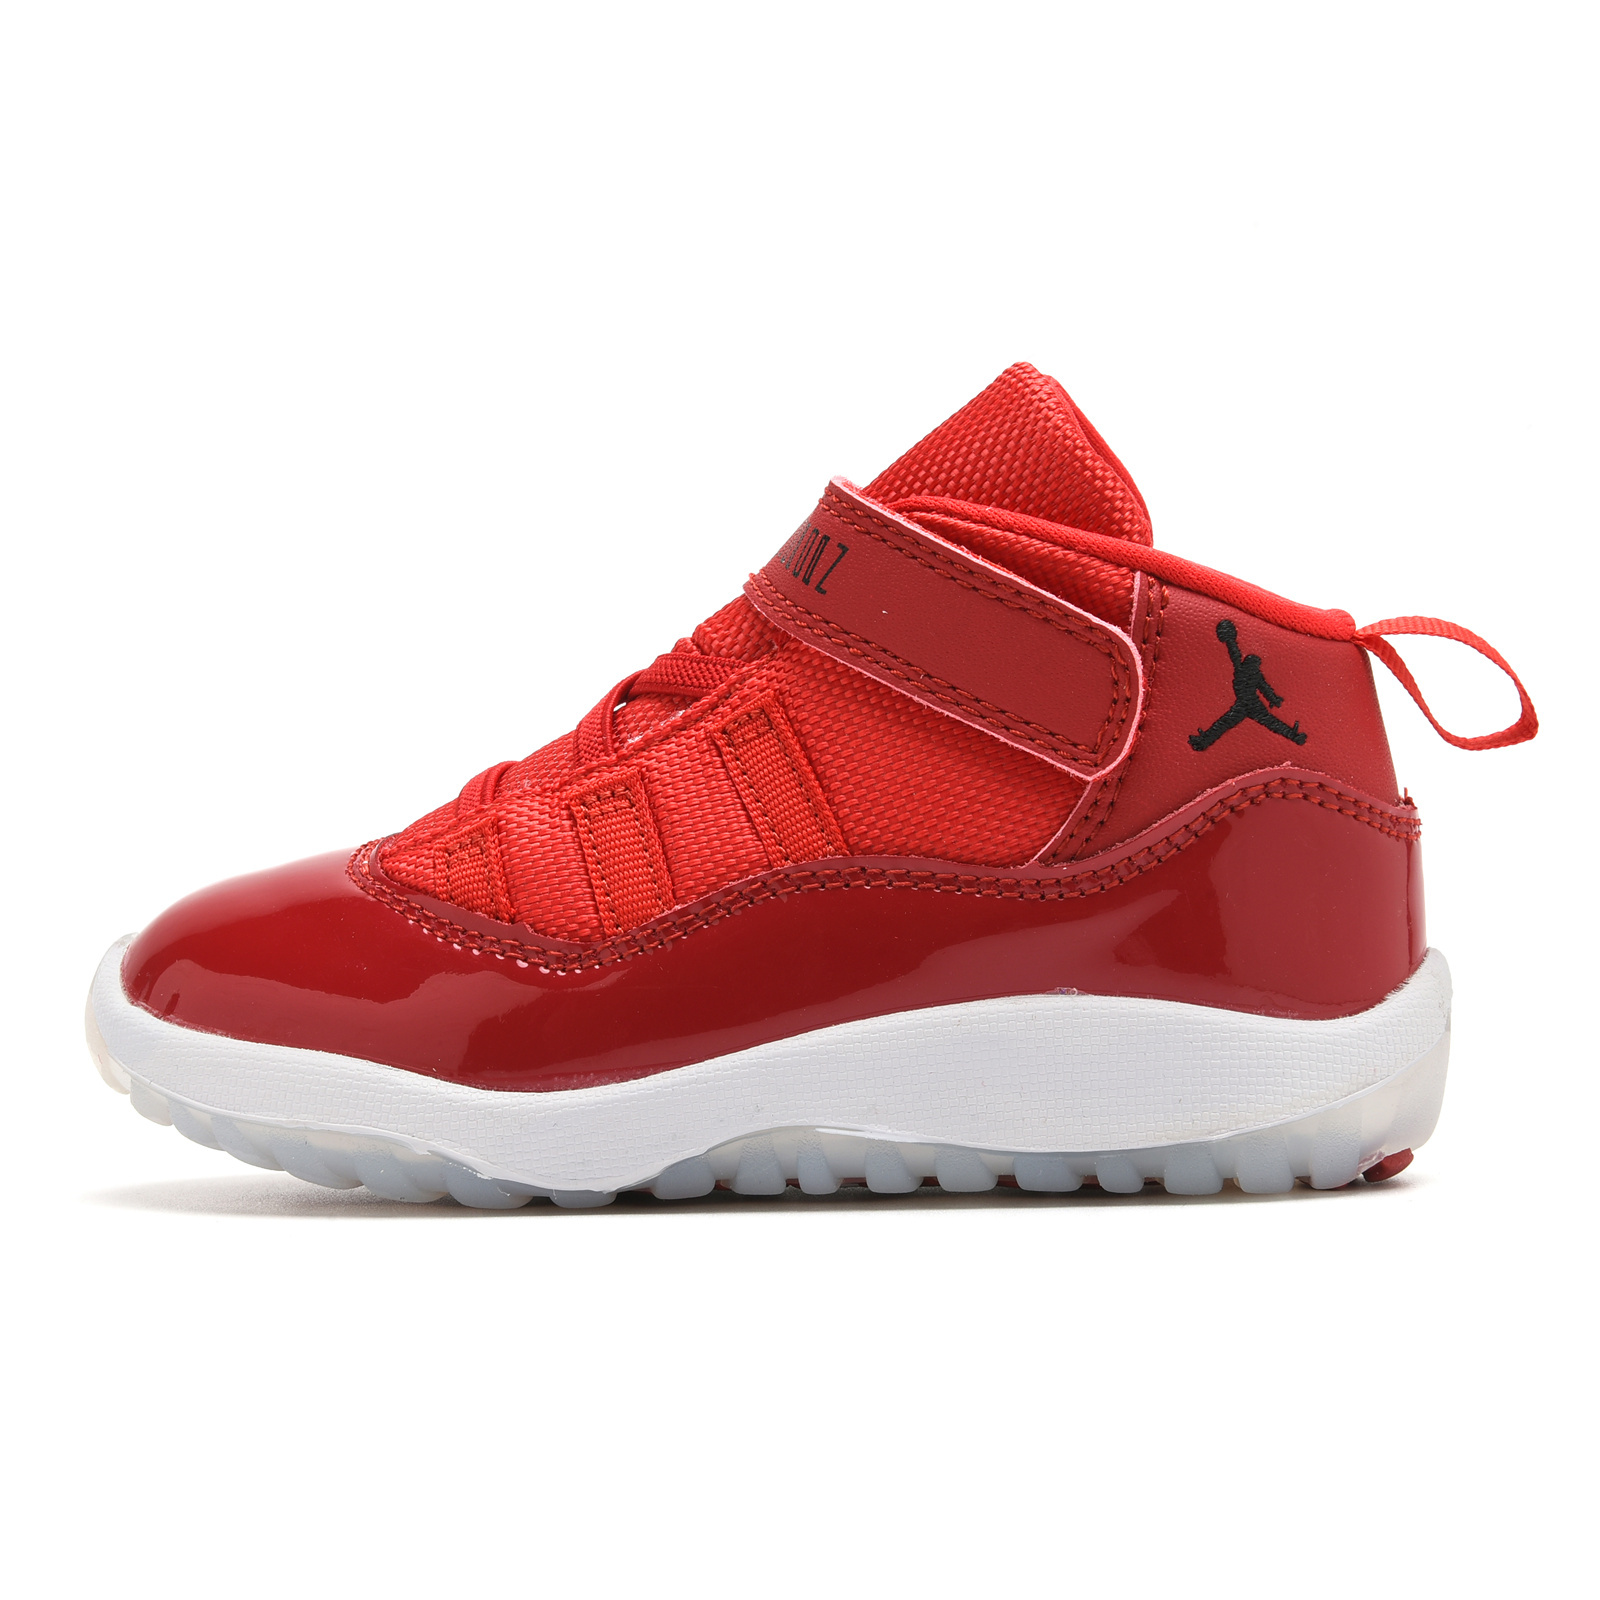 Youth Running Weapon Air Jordan 11 Red Shoes 036